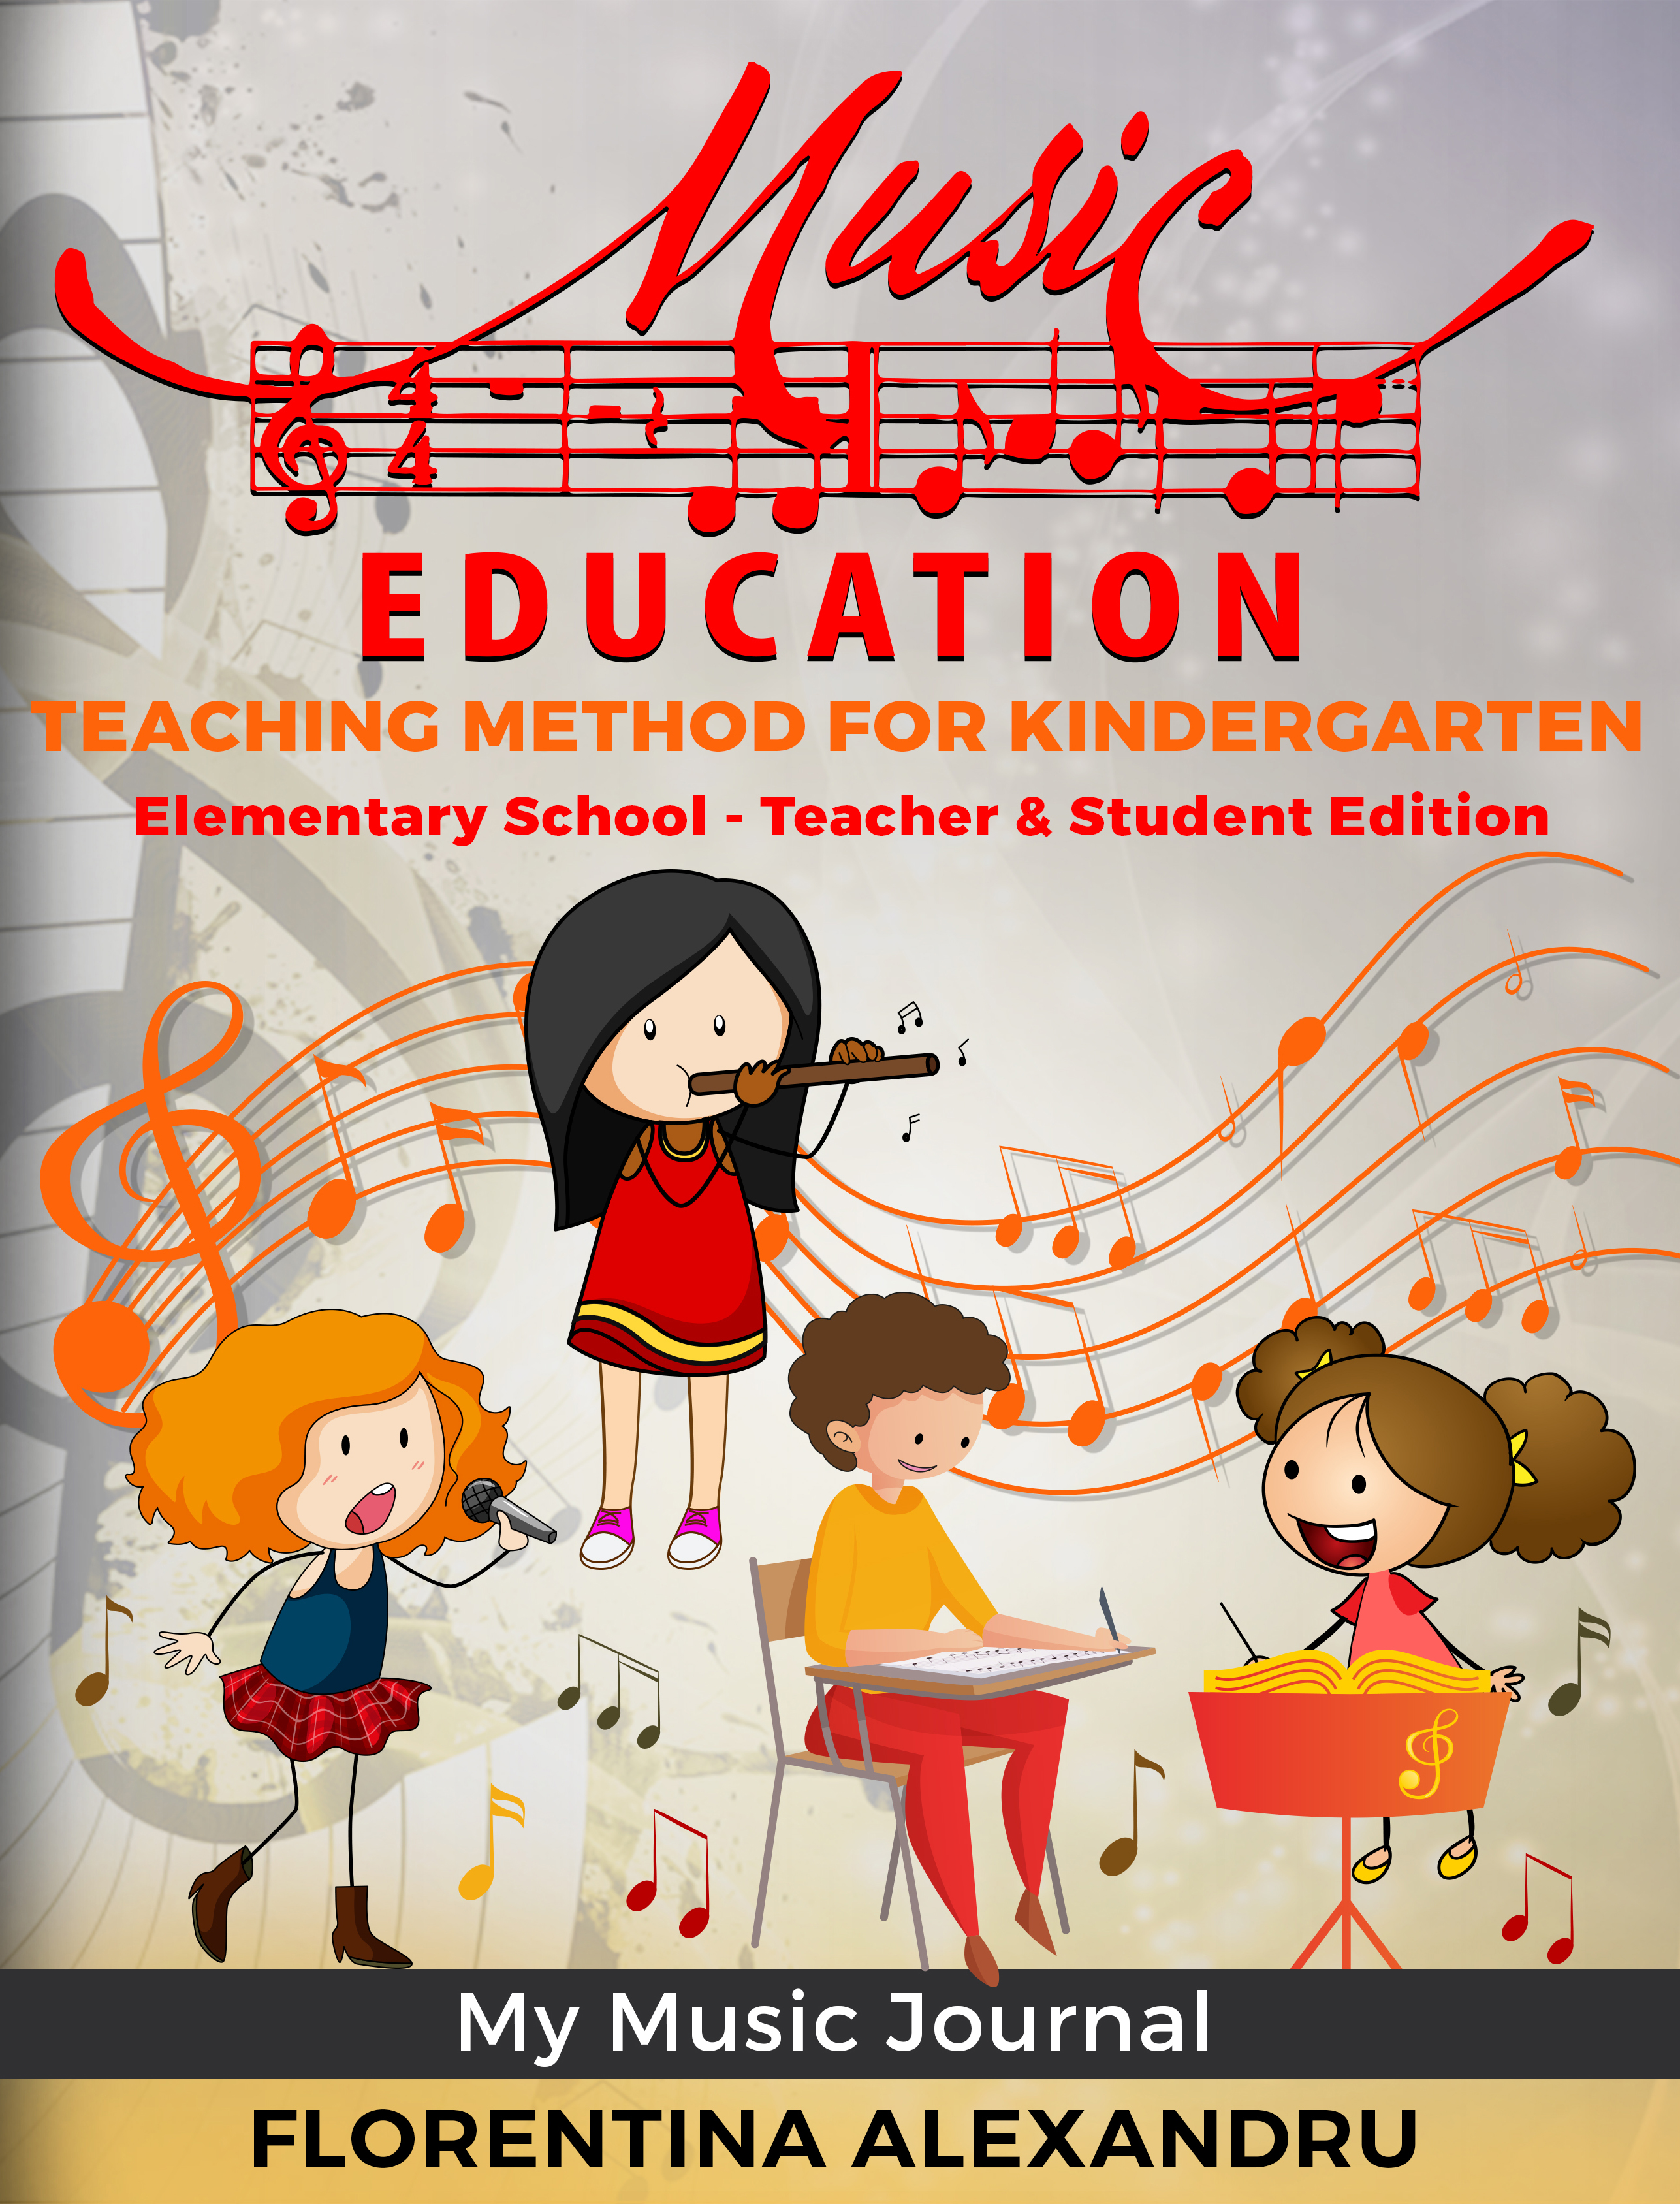 313 Music Education covers 1st-4th grade